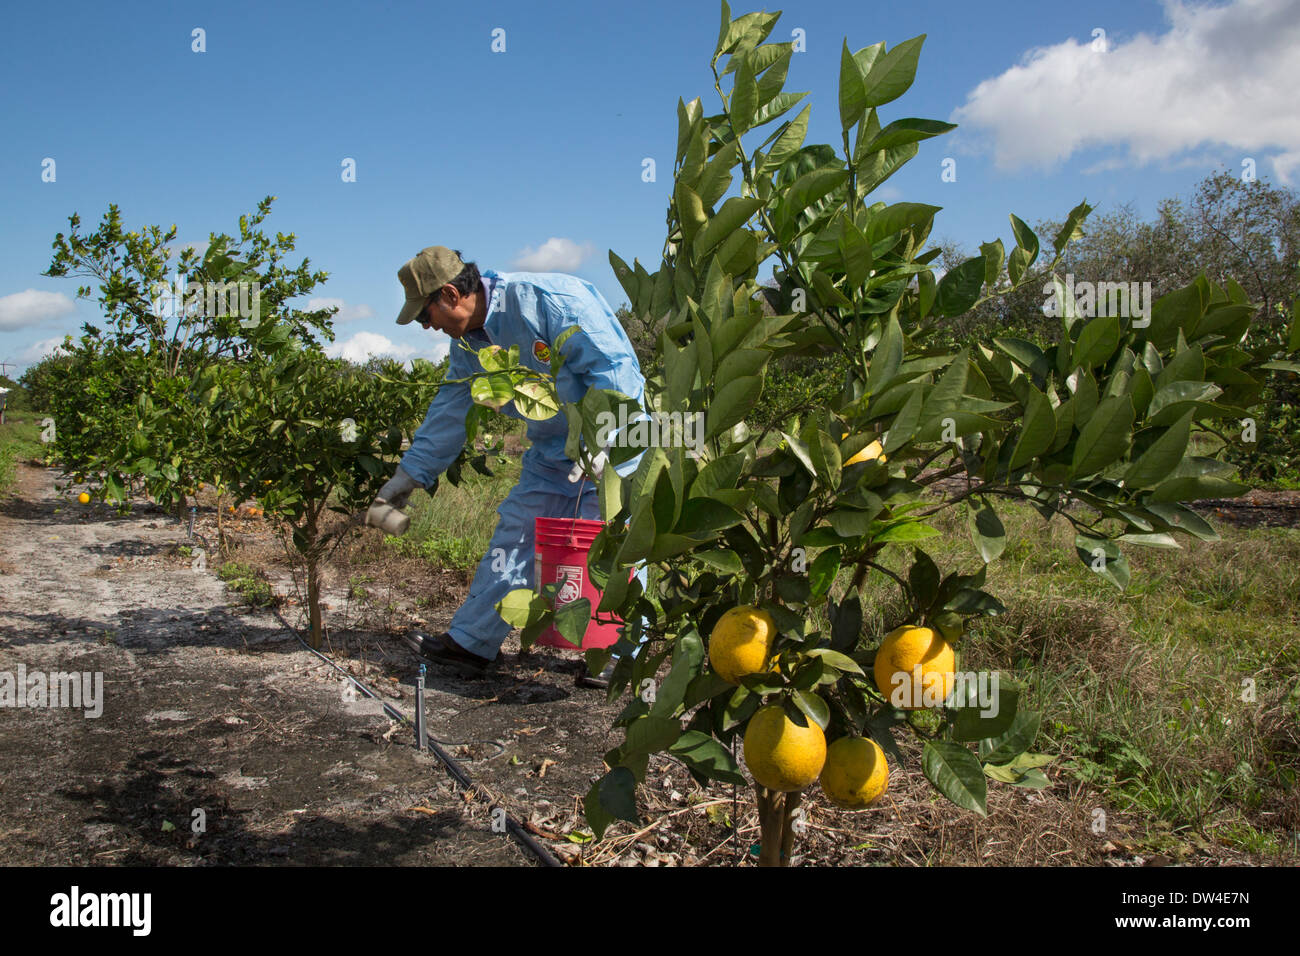 Fort Pierce, Florida - A worker sprinkles fertilizer around young grapefruit trees Stock Photo